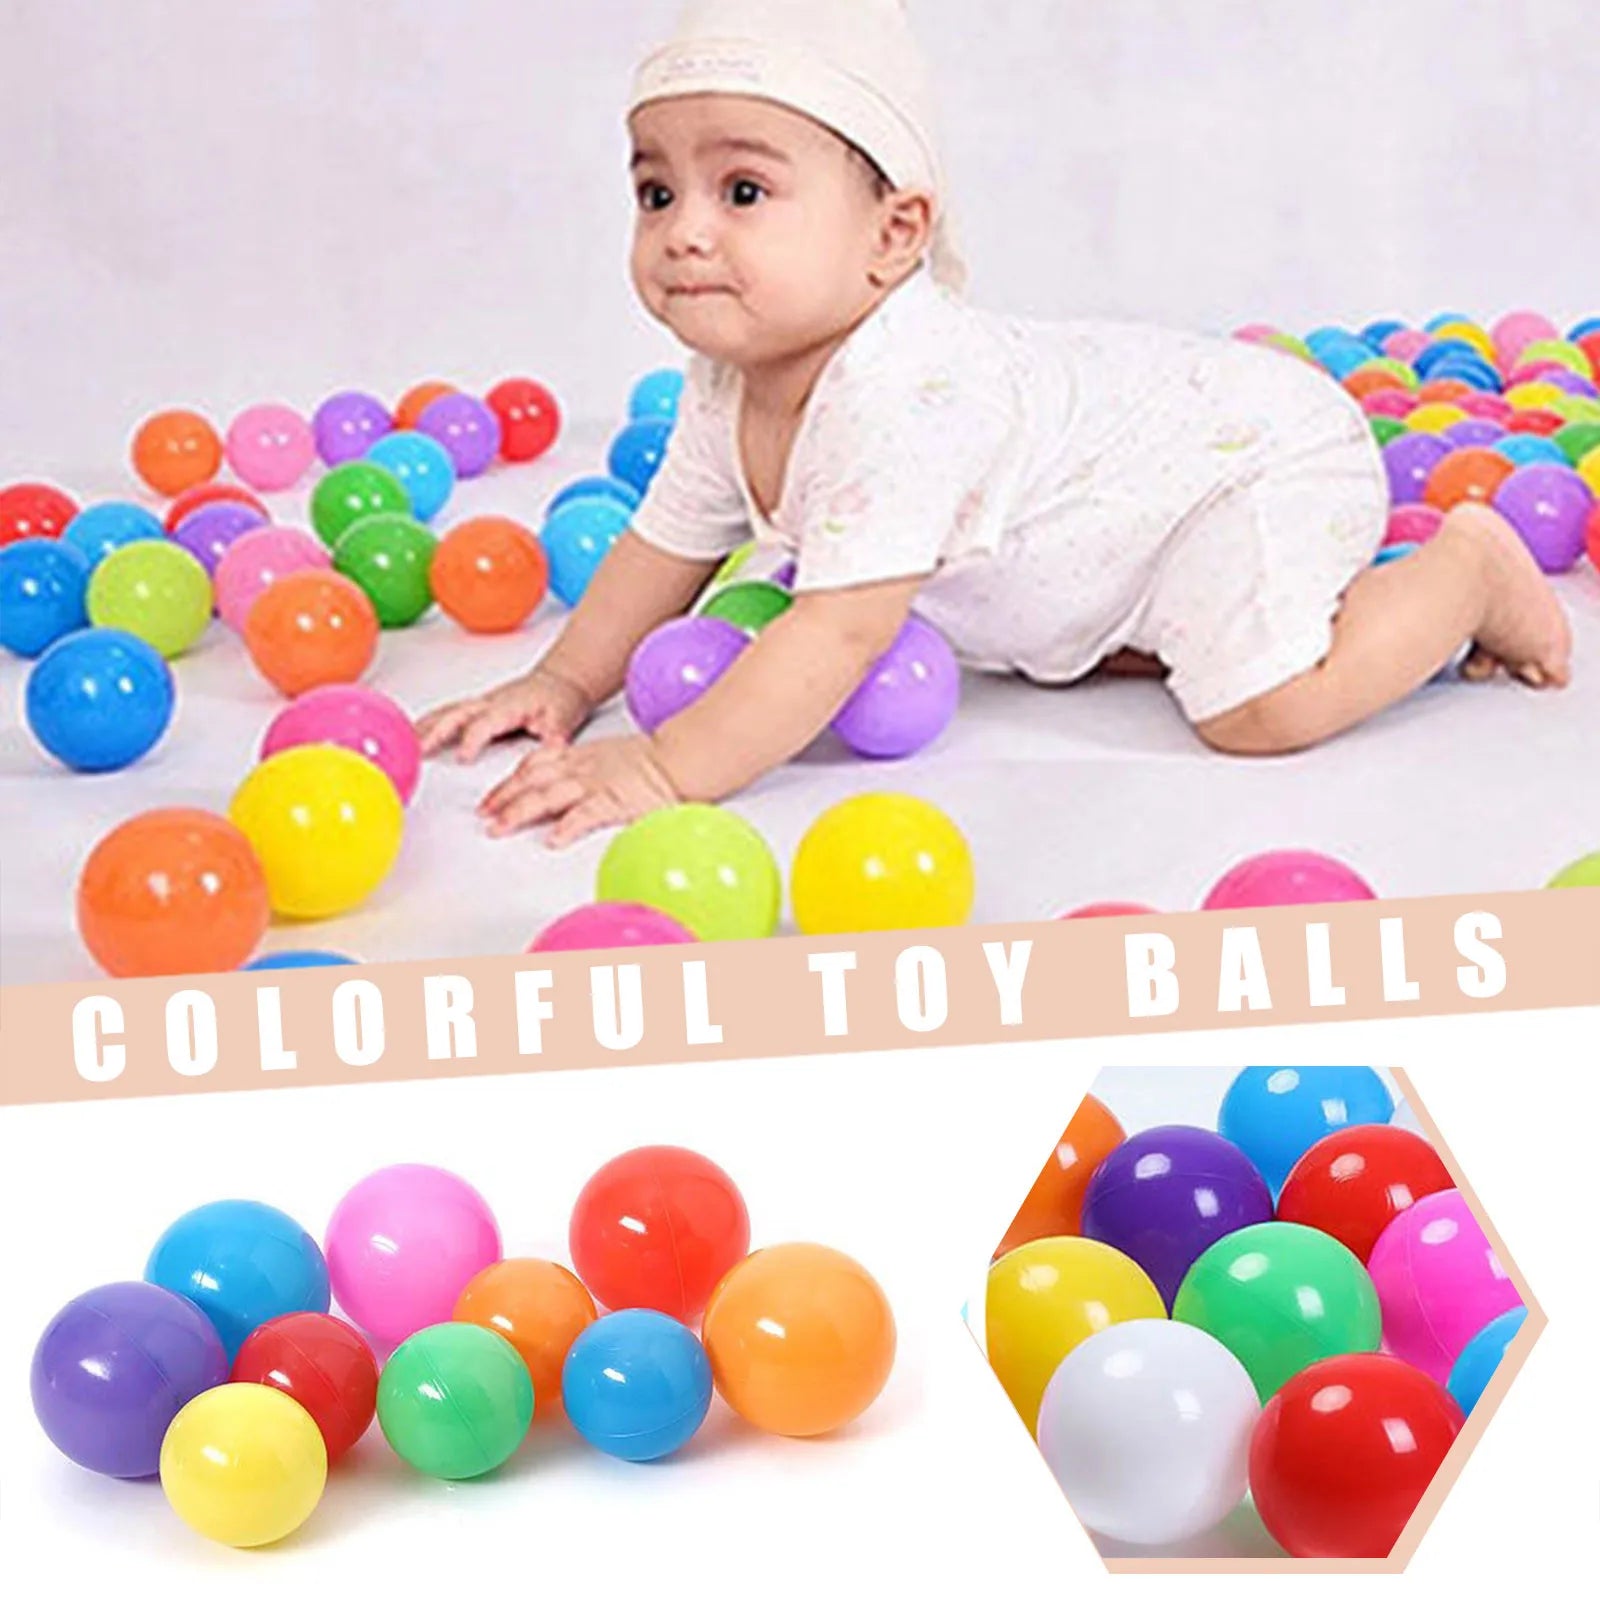 100Pcs 55MM Baby Plastic Balls Water Pool Ocean Ball Games for Children Swim Pit Play House Outdoors Sport Ball Tents